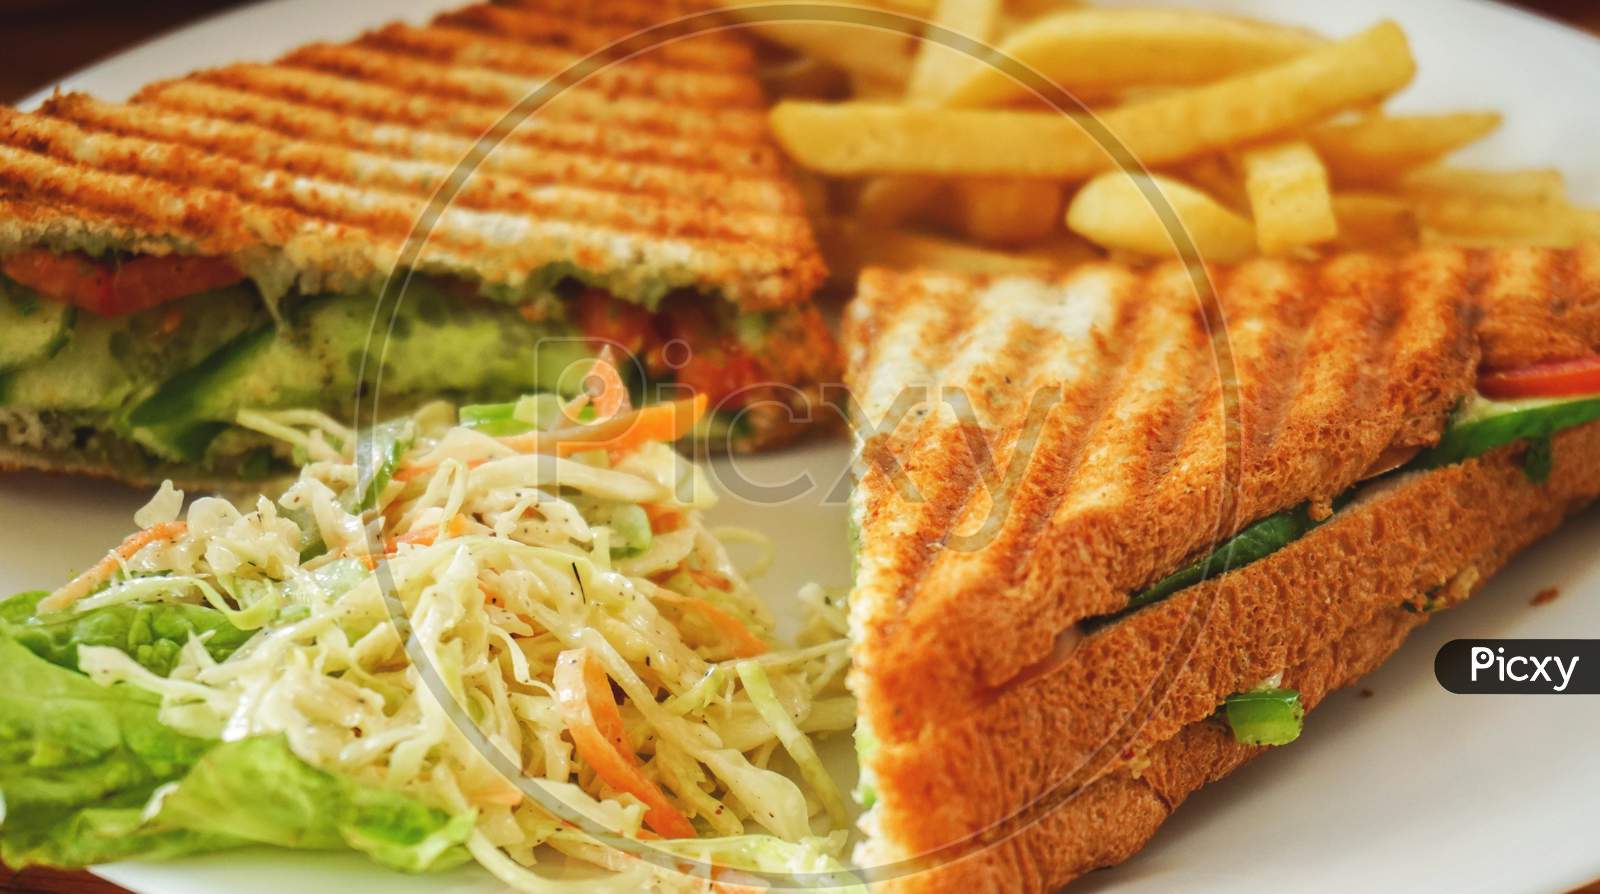 Grilled sandwich with fries and salad